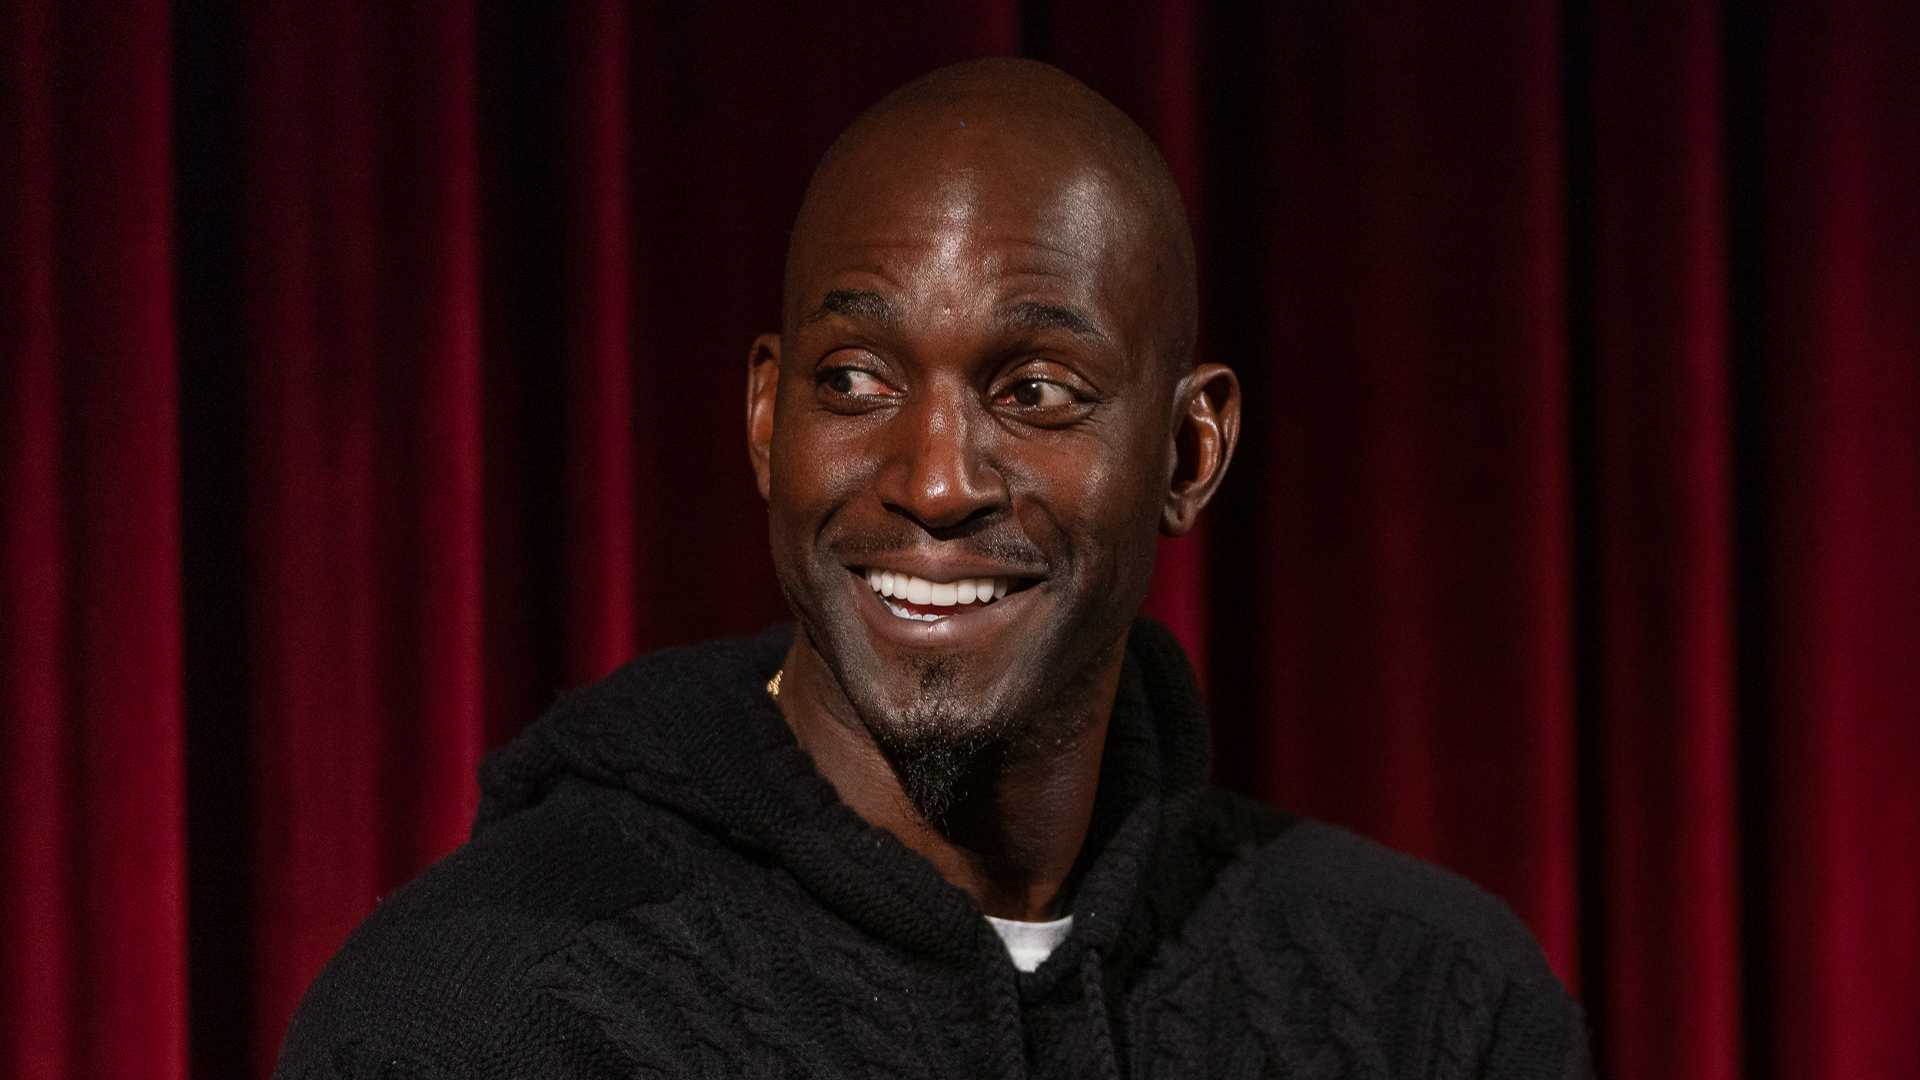 Kevin Garnett Will Ring In The New Year By Launching A 3x3 Street Basketball League